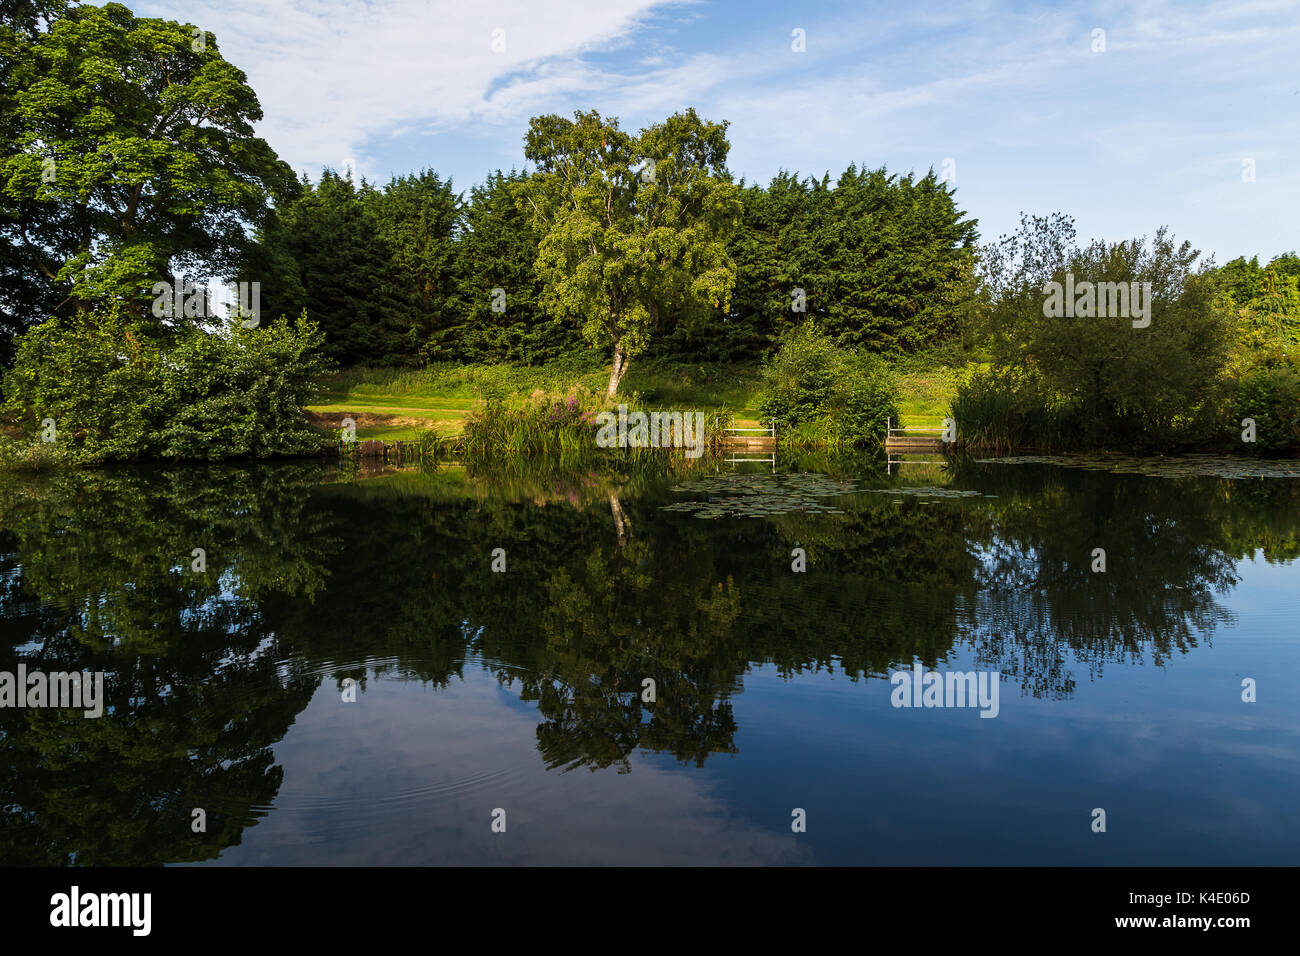 Loch Neaton in the heart of the town of Watton in central Norfolk, captured early one morning after sunrise. Stock Photo